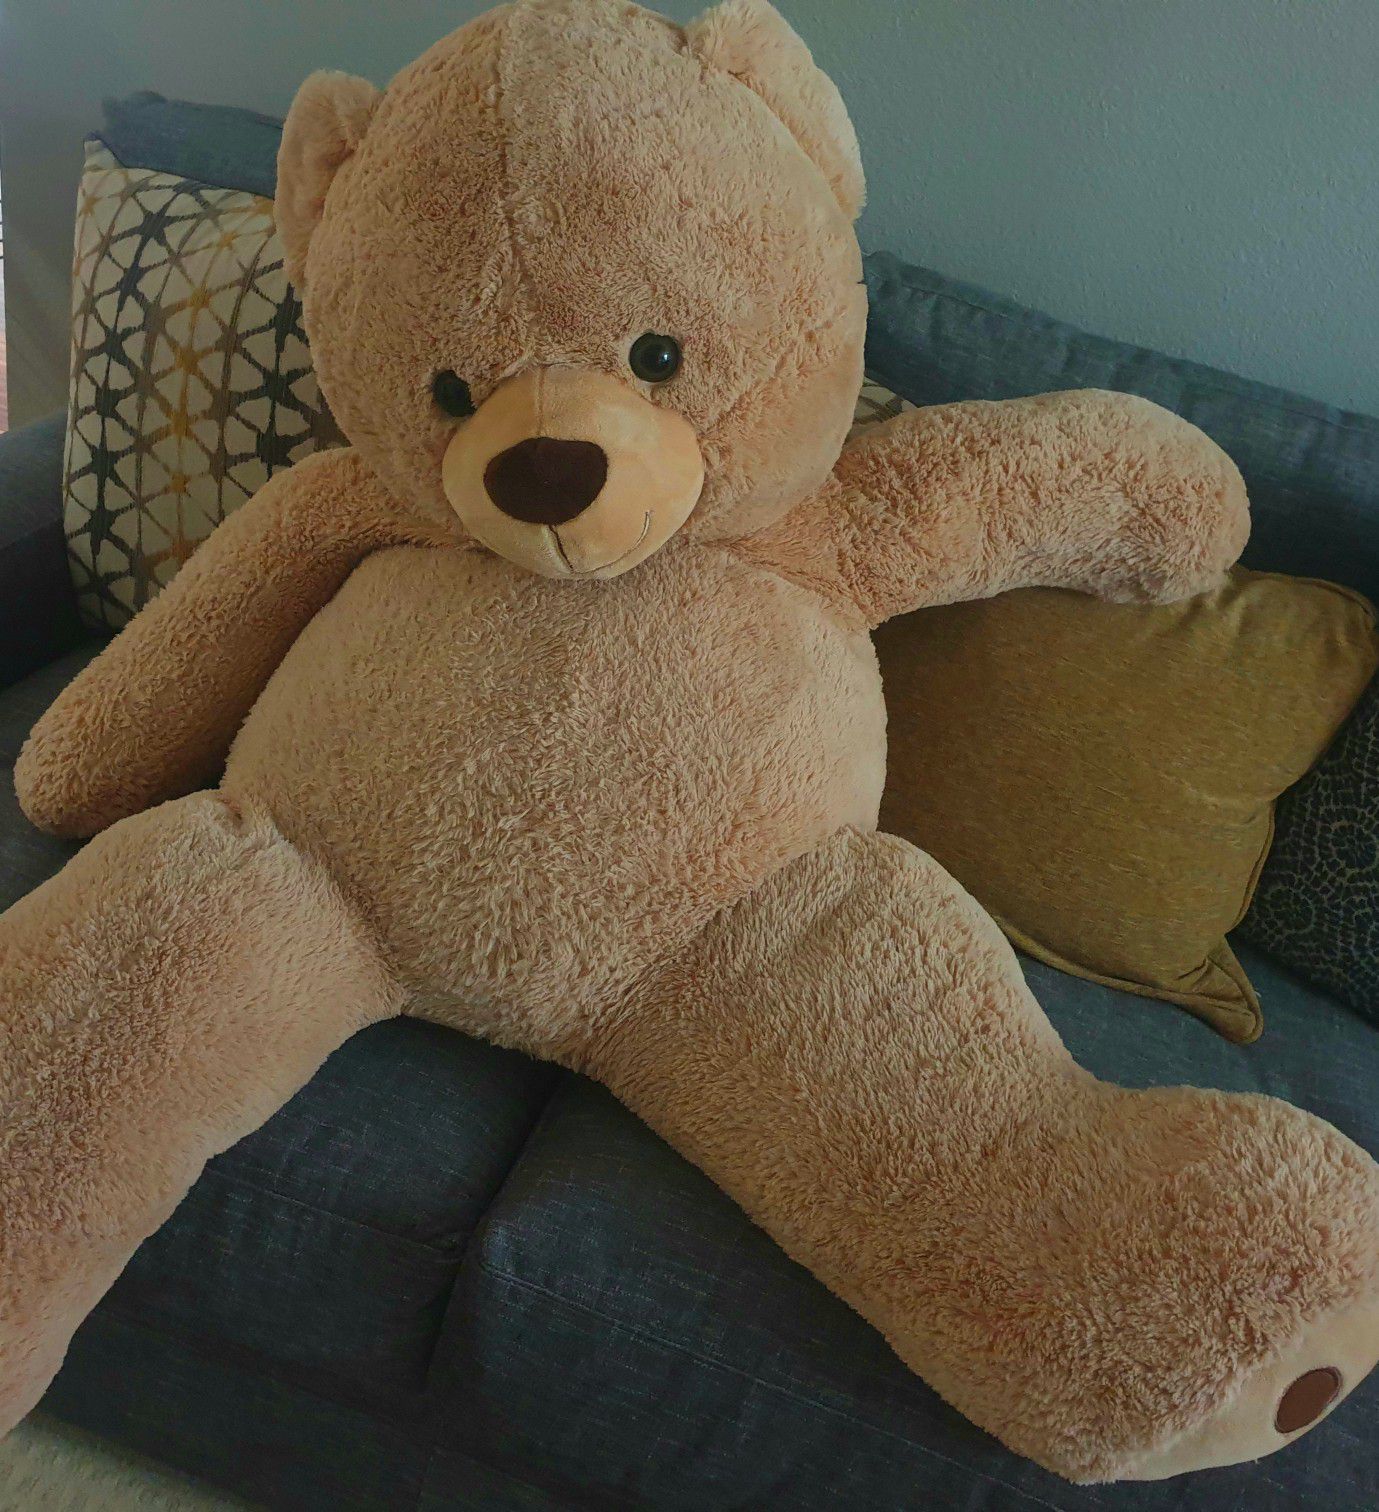 TEDDY BEAR XXL 60 INCHES IN EXCELLENT CONDITIONS $30